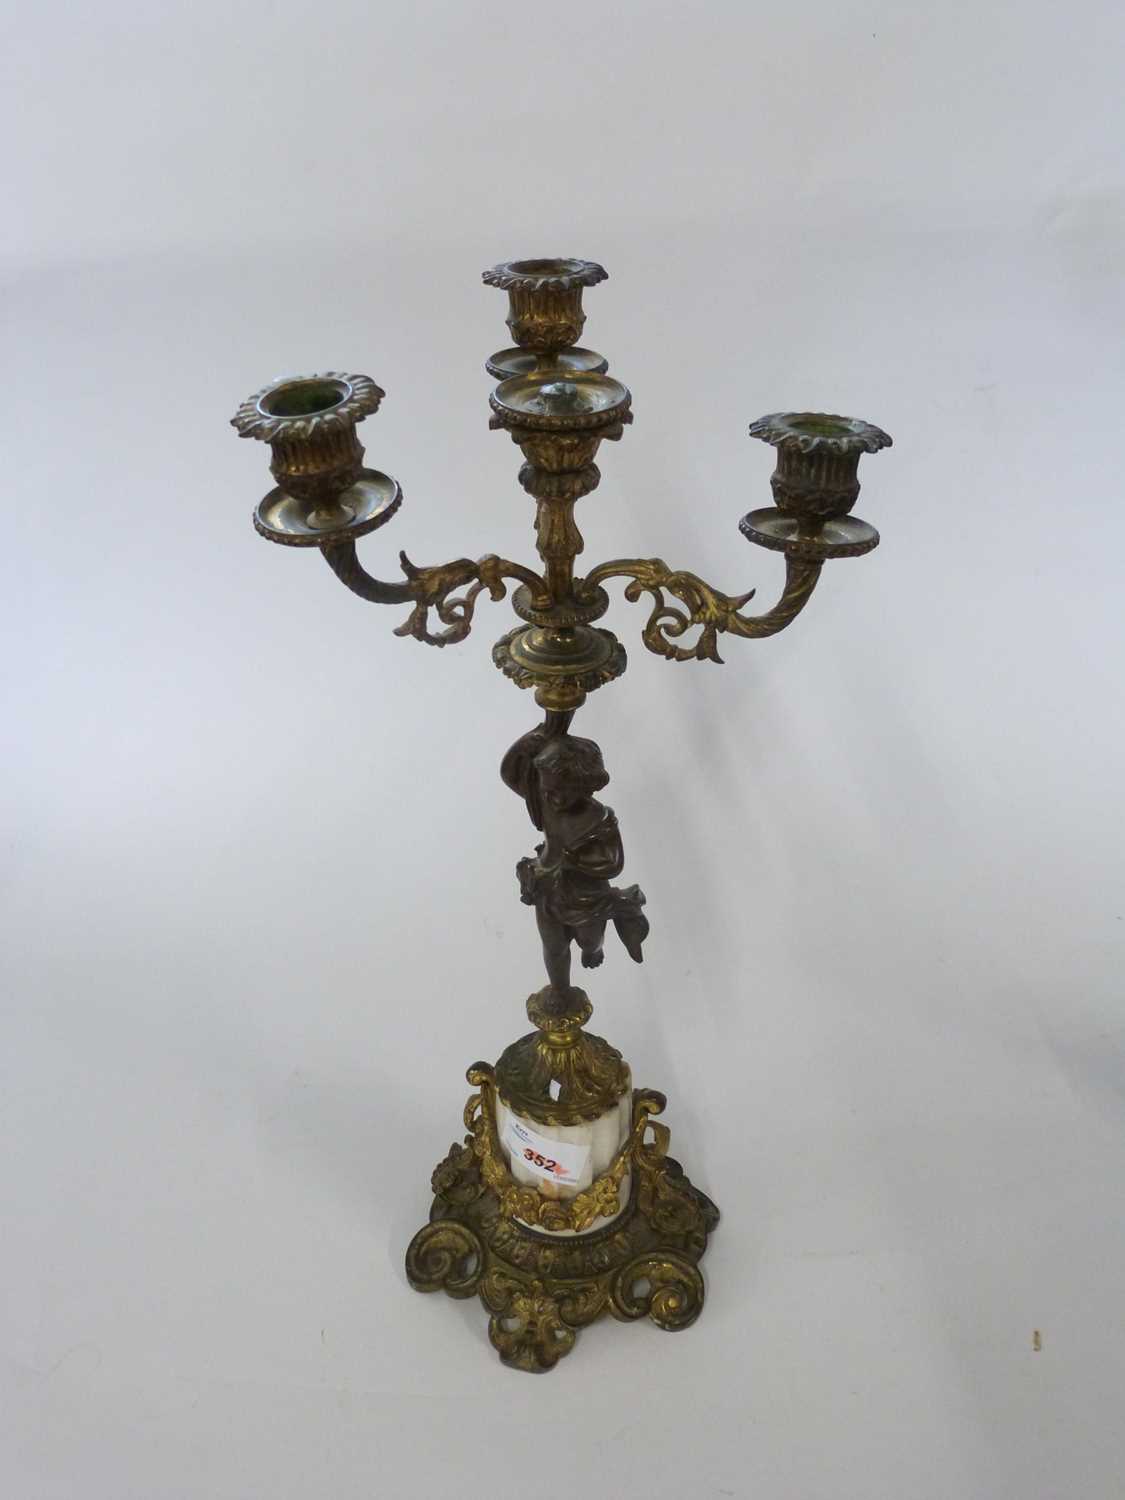 Pair of candelabra in French Empire style the four branch candelabra supported by a bronzed cherub - Image 4 of 6